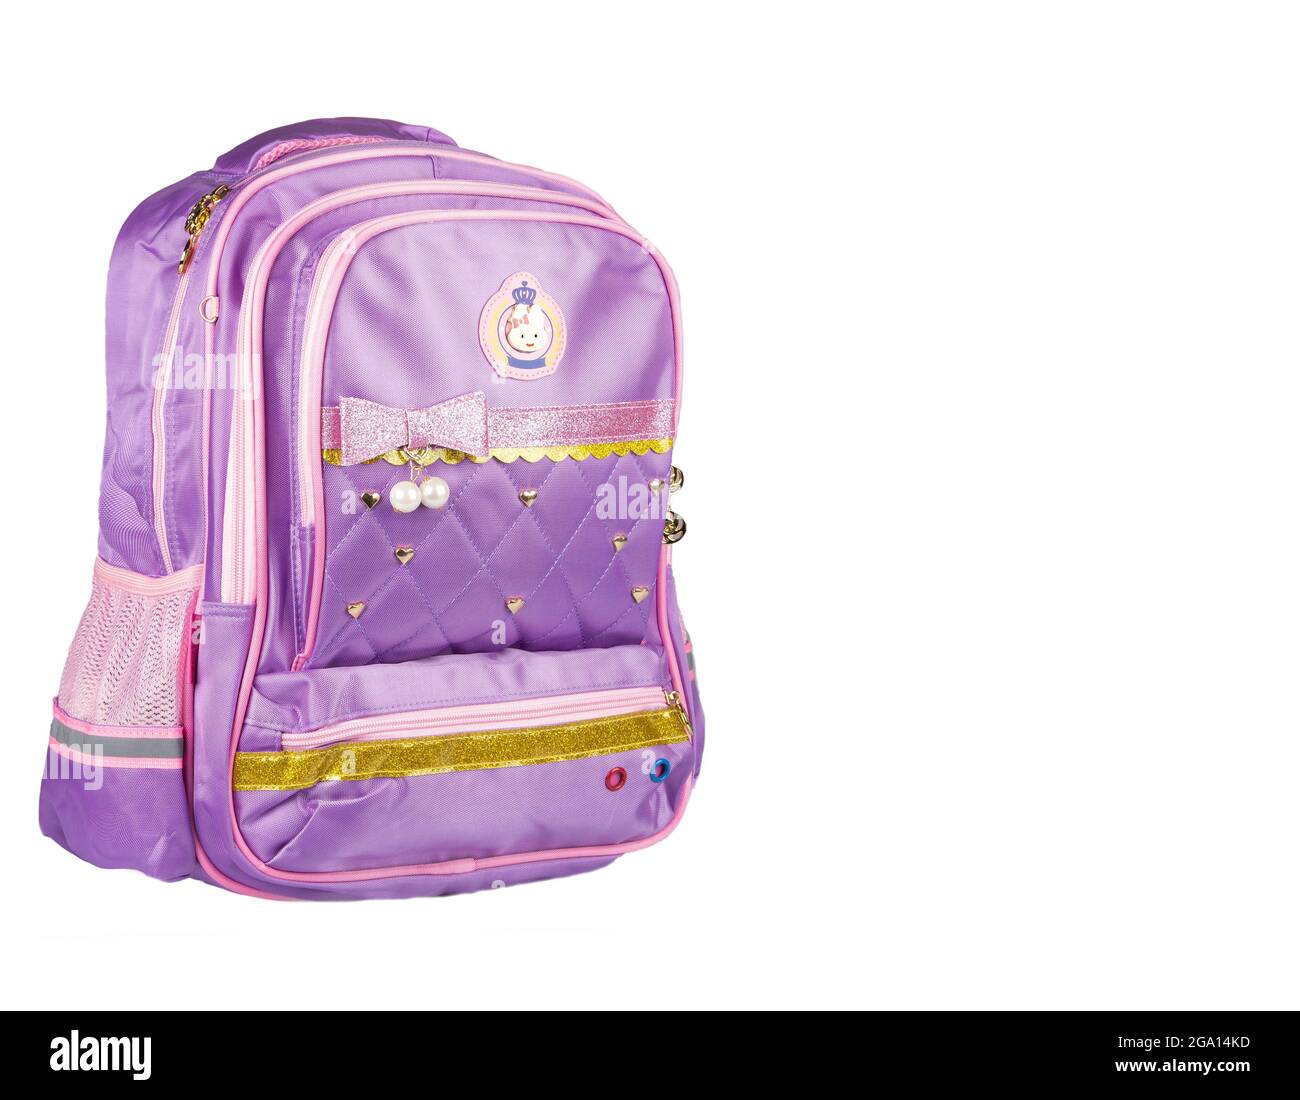 A lilac-colored school backpack on a white background. Stock Photo